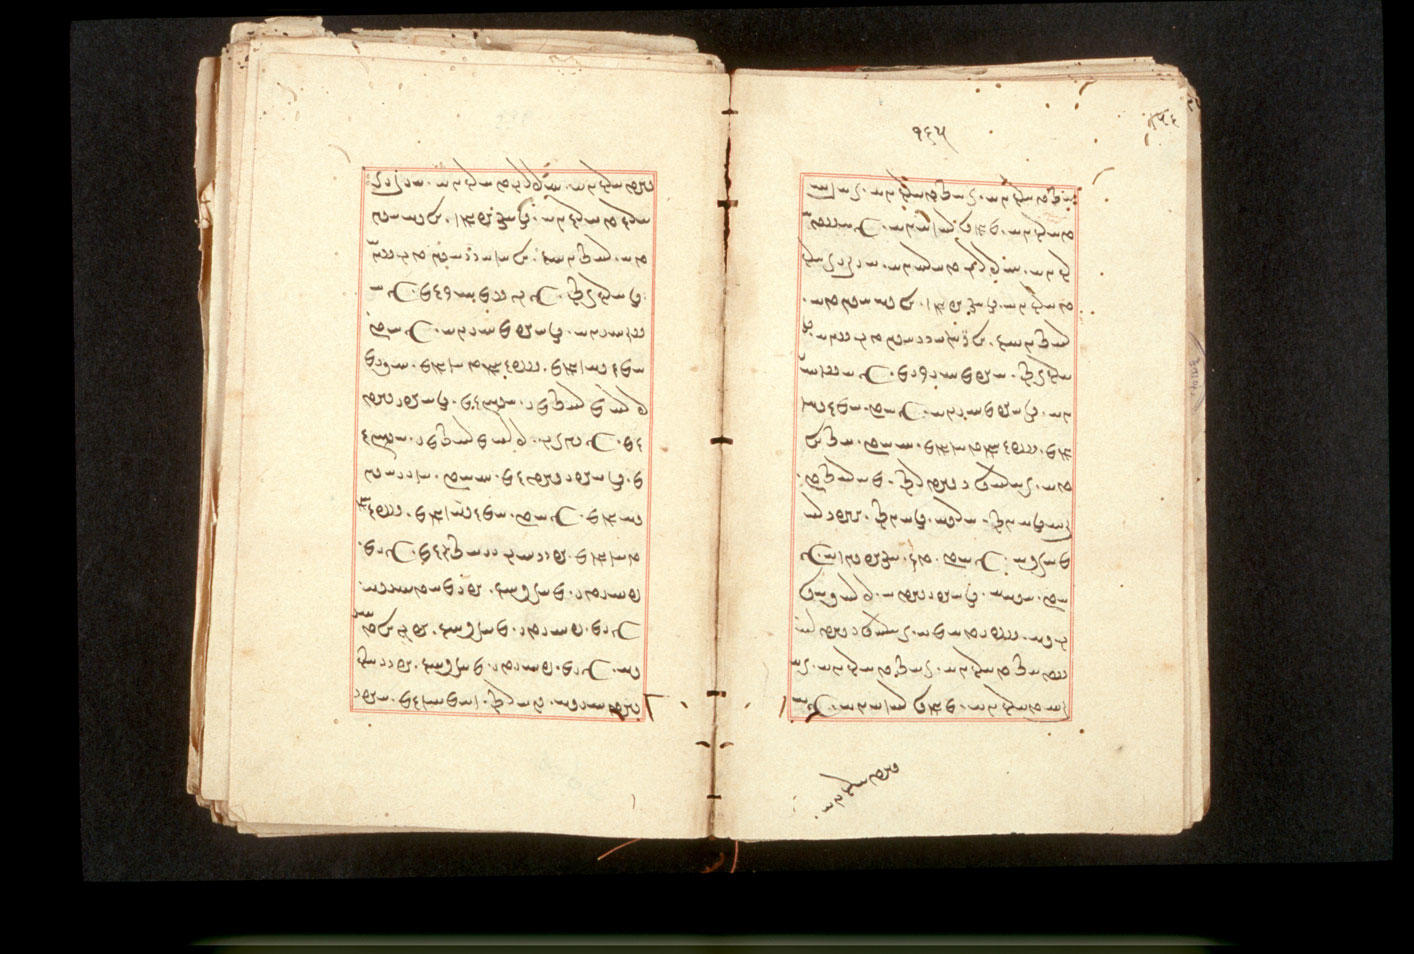 Folios 165v (right) and 166r (left)